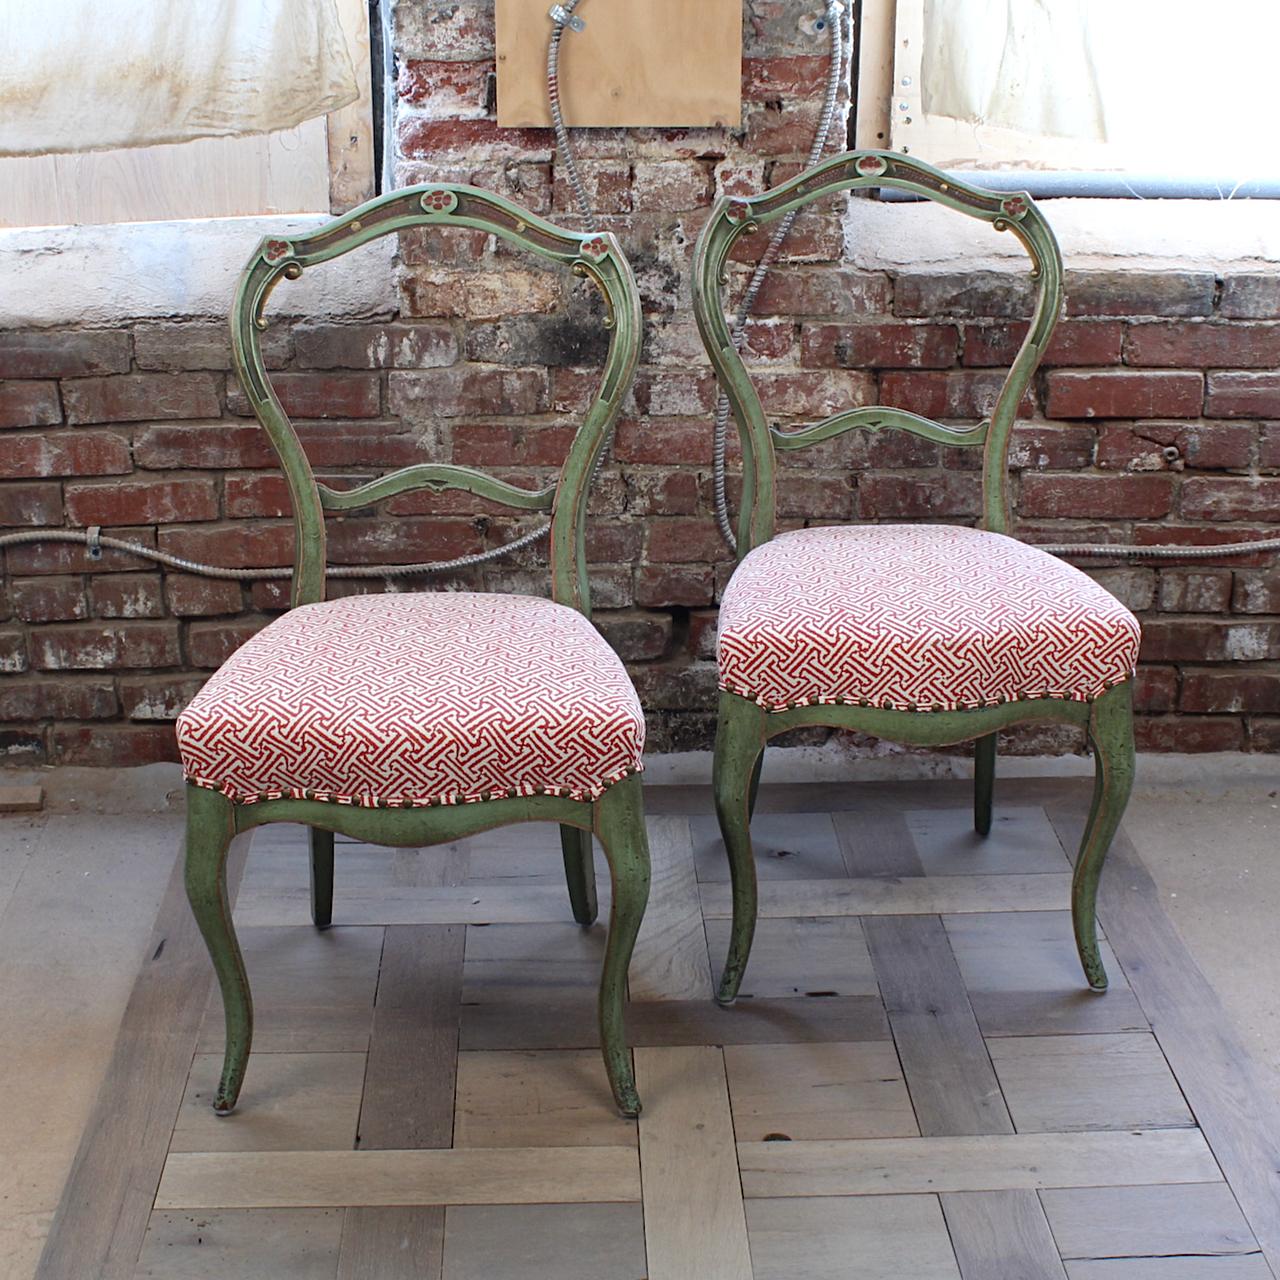 A fine pair of Victorian balloon back side chairs.

With delicate cabriole front legs and a shaped back with medial stretcher.

The chairs have a 20th century faux finish green repaint with red and gold highlights. 

The seats have a new (last